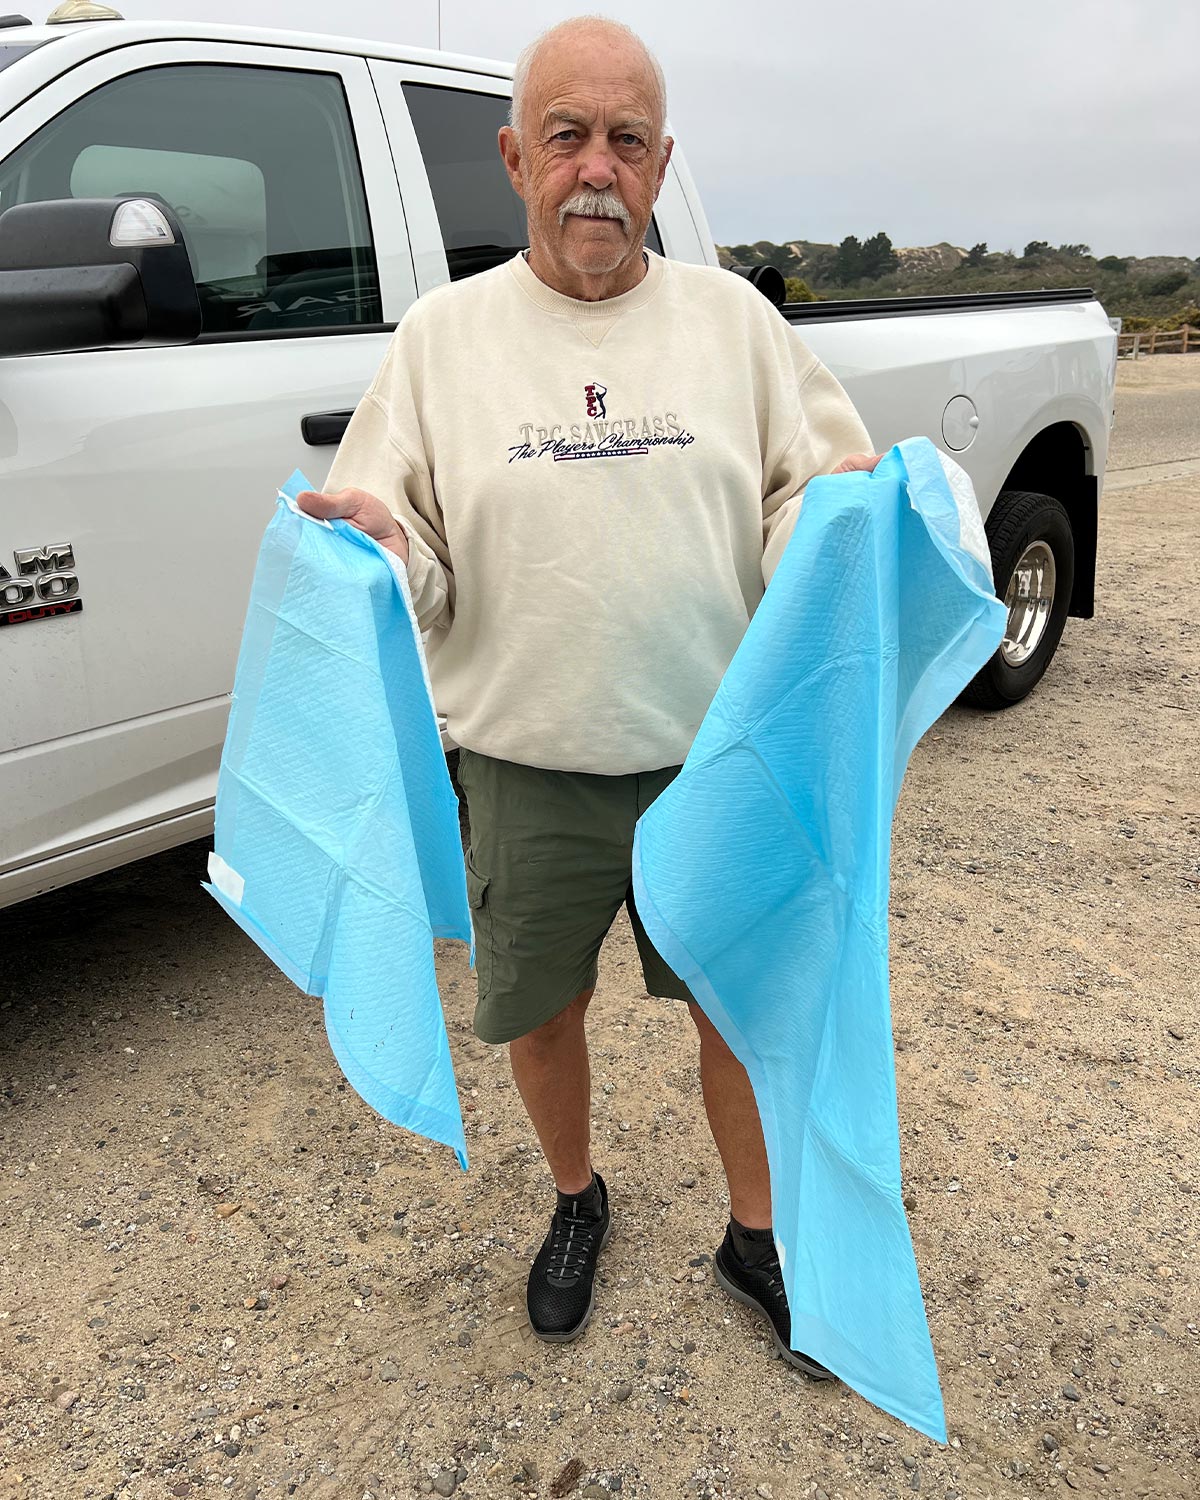 RV technician holds two different sized piddle pads for comparison